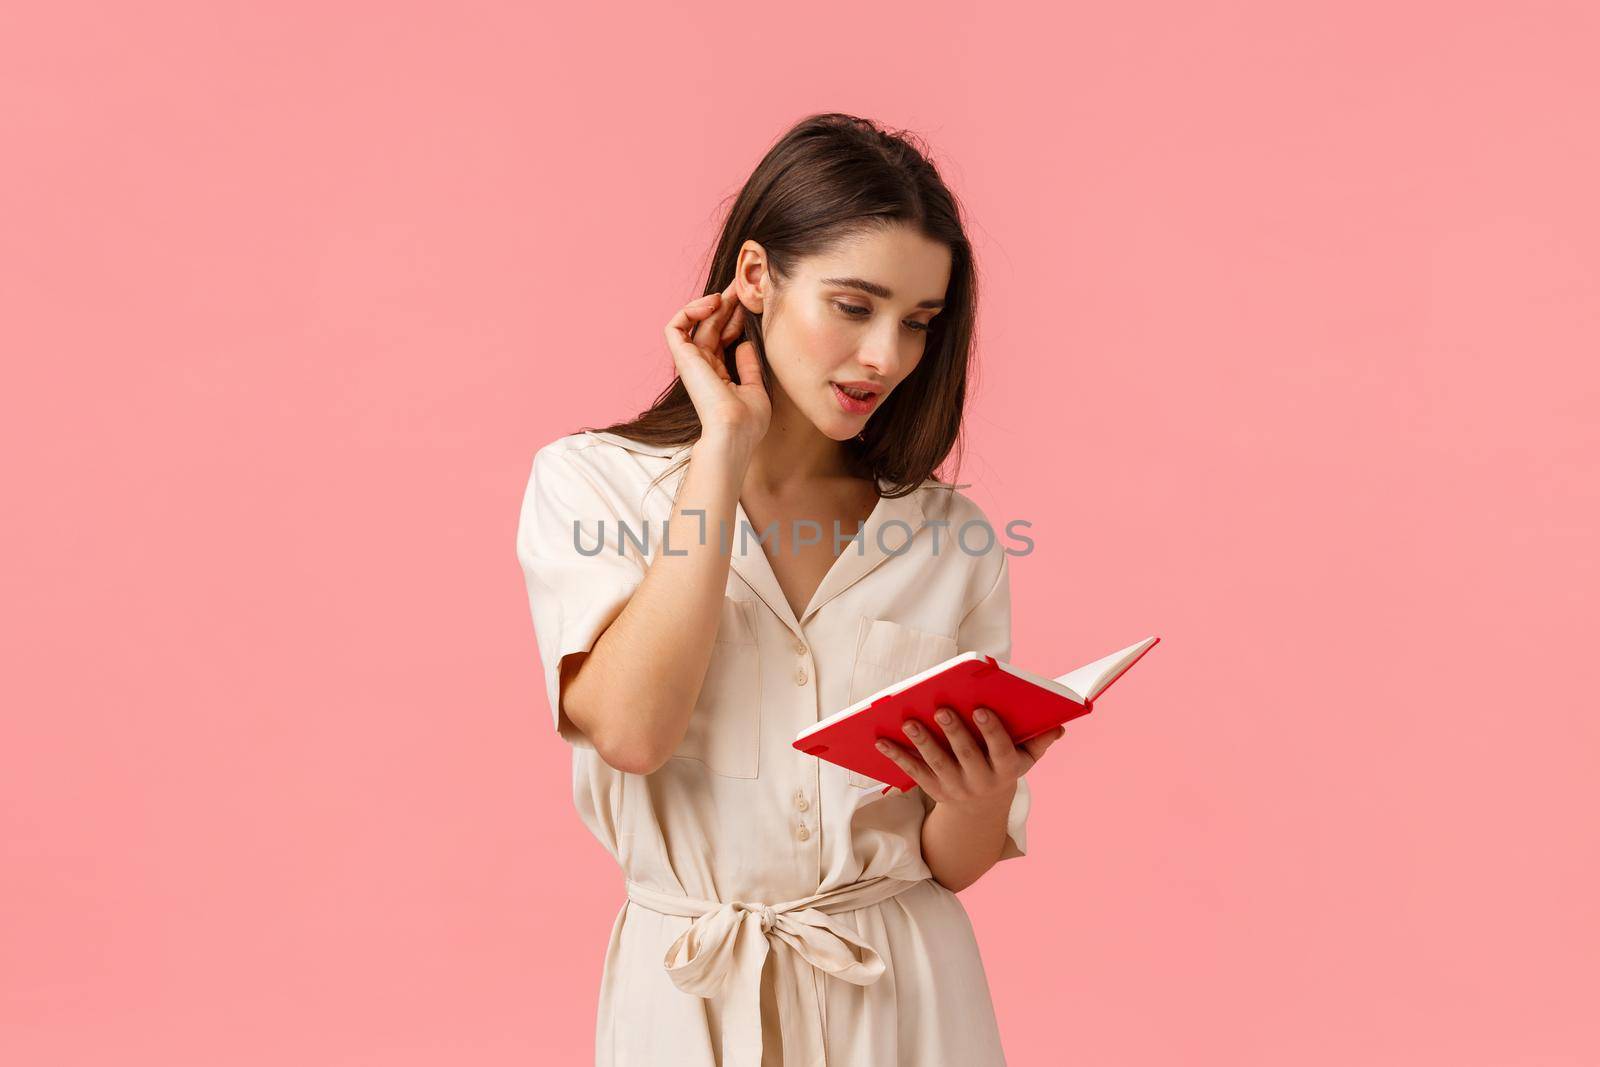 Romantic and tender young alluring woman in dress, put hair strand behind ear and reading notes from red notebook, writing something, studying for exams, standing pink background. Copy space